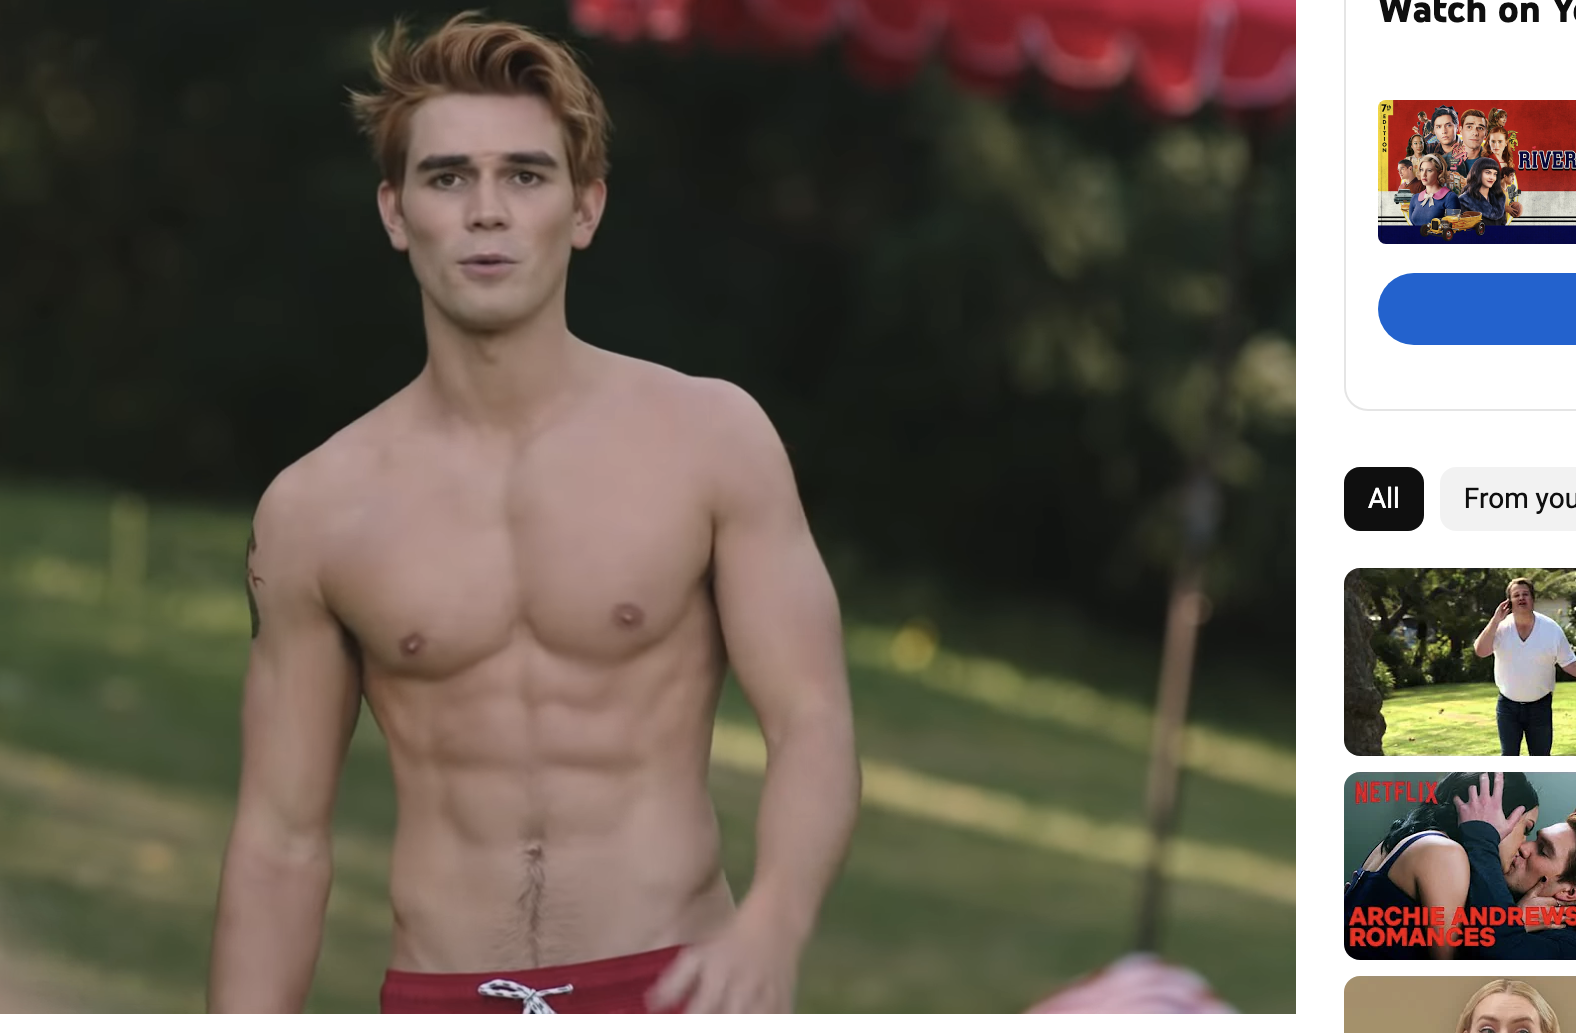 A shirtless KJ as Archie in &quot;Riverdale&quot;